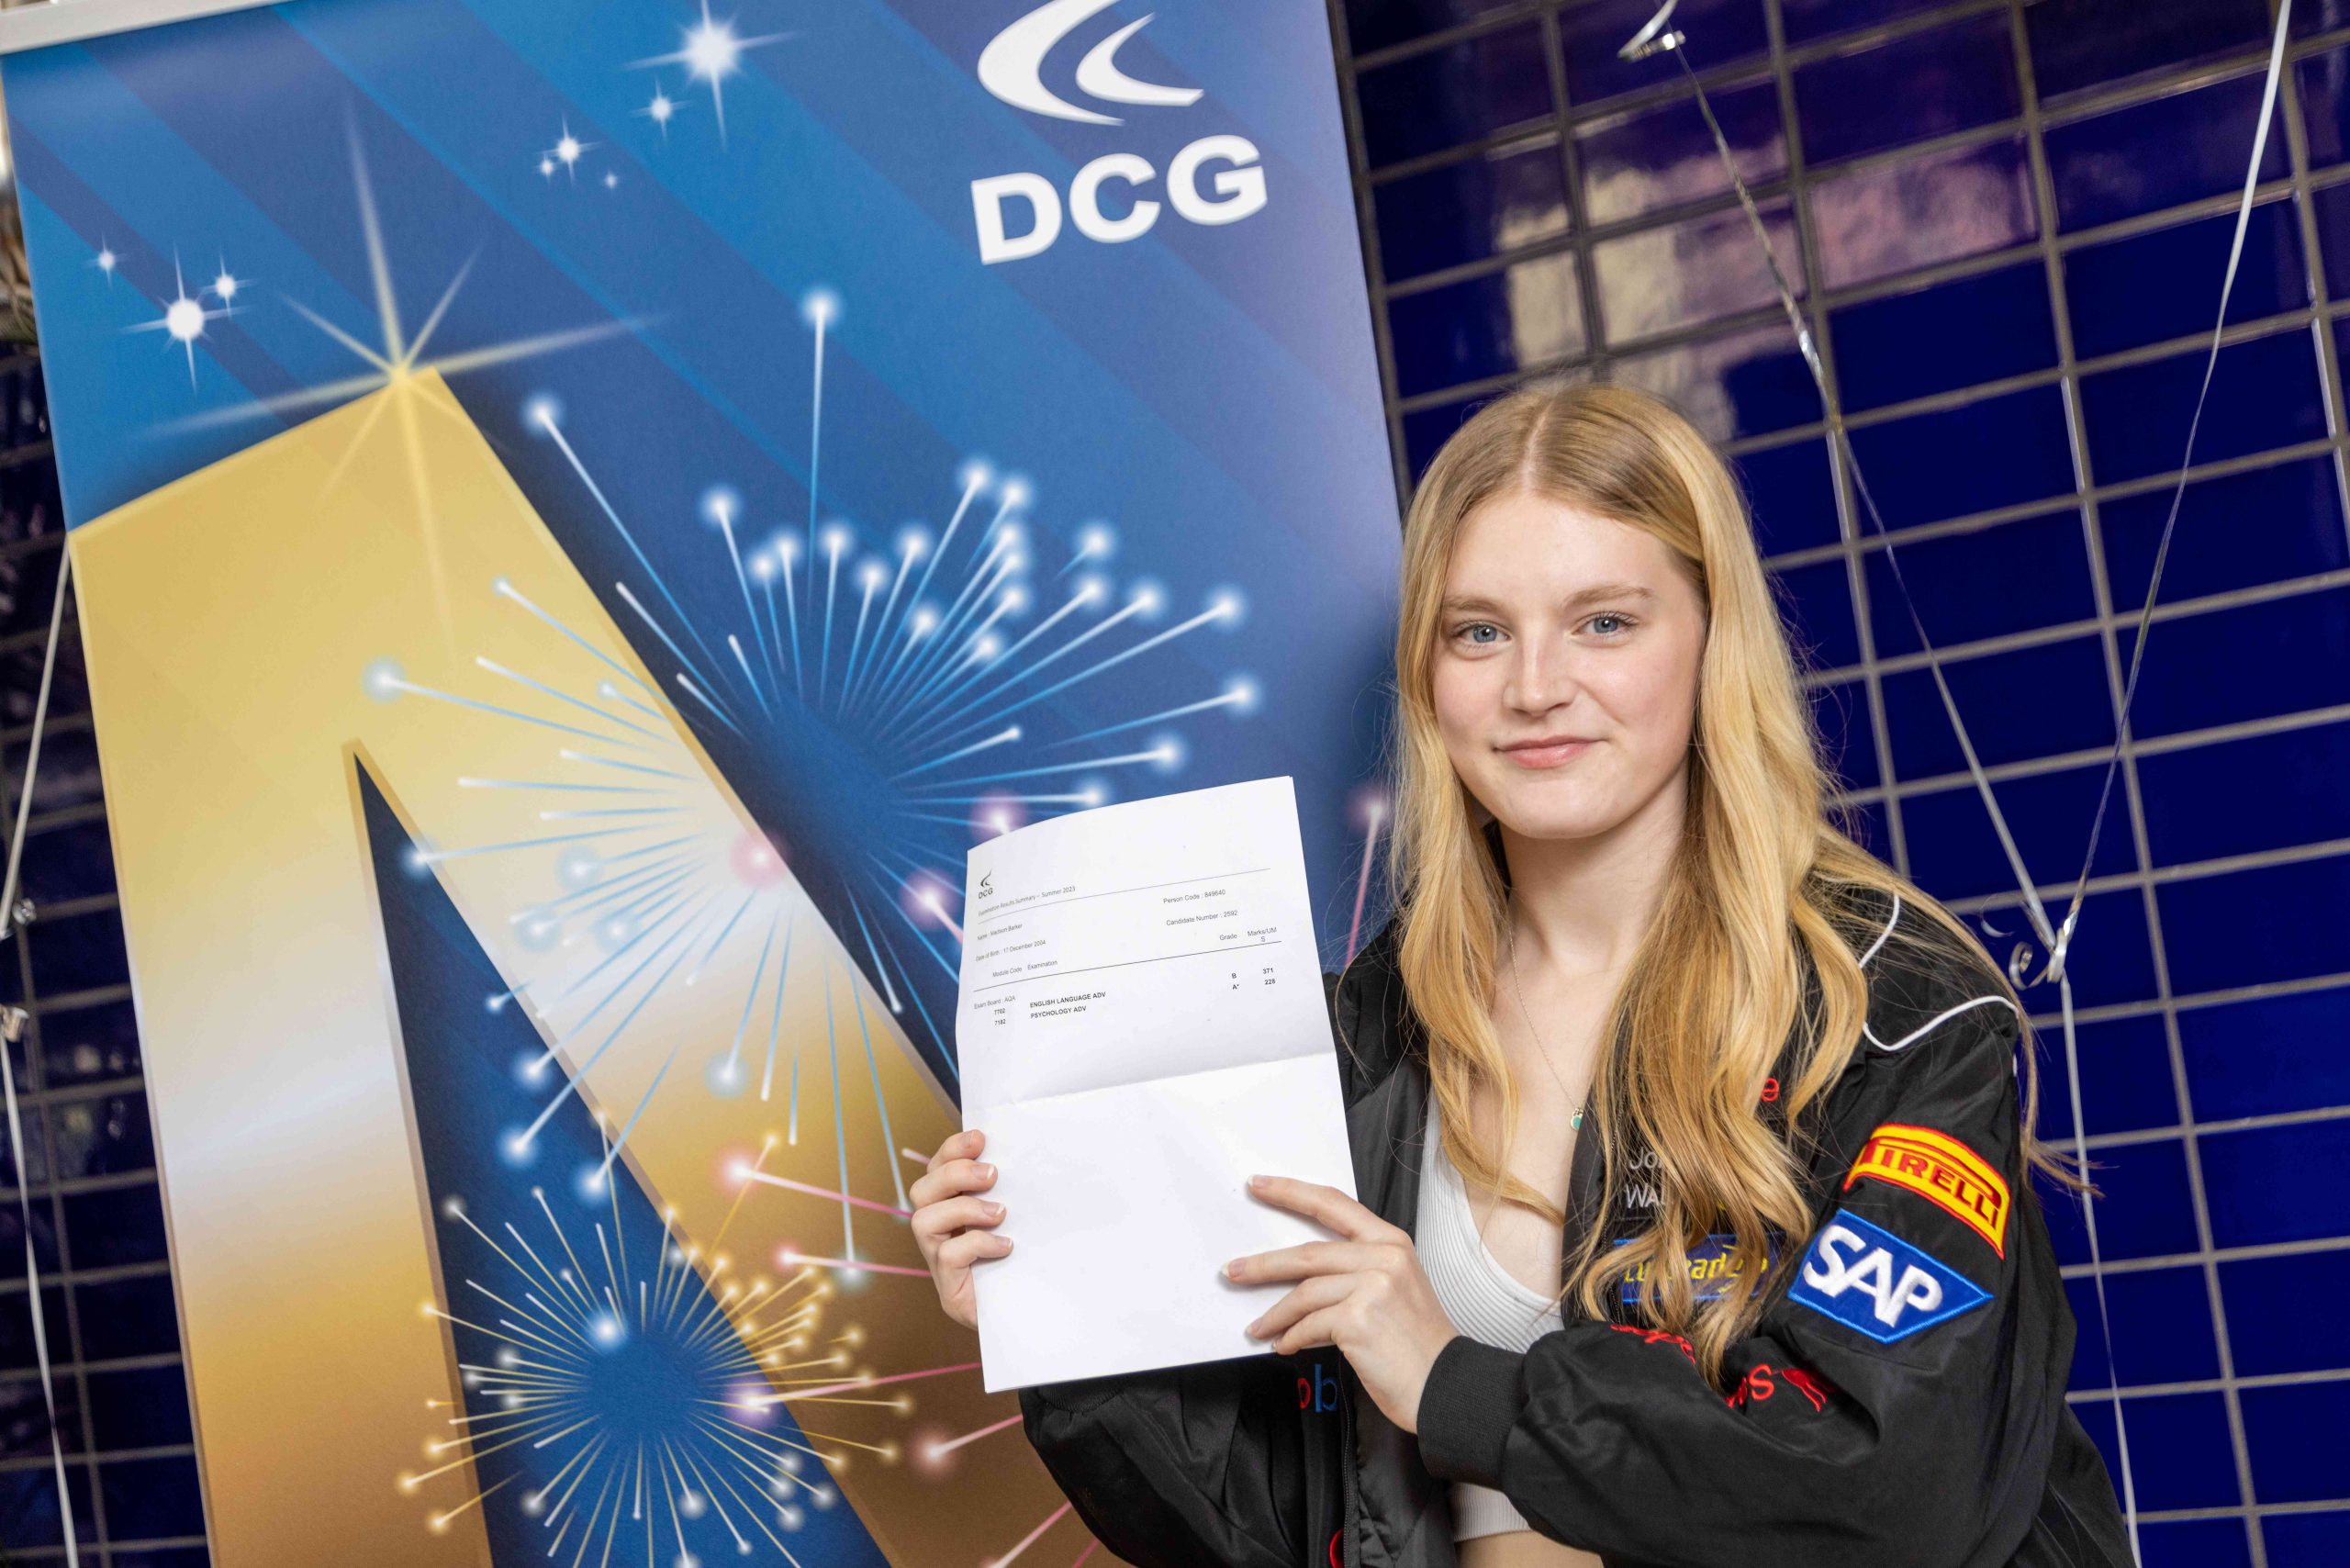 Young female student with blonde hair and a black coat holding a document with exam results on.